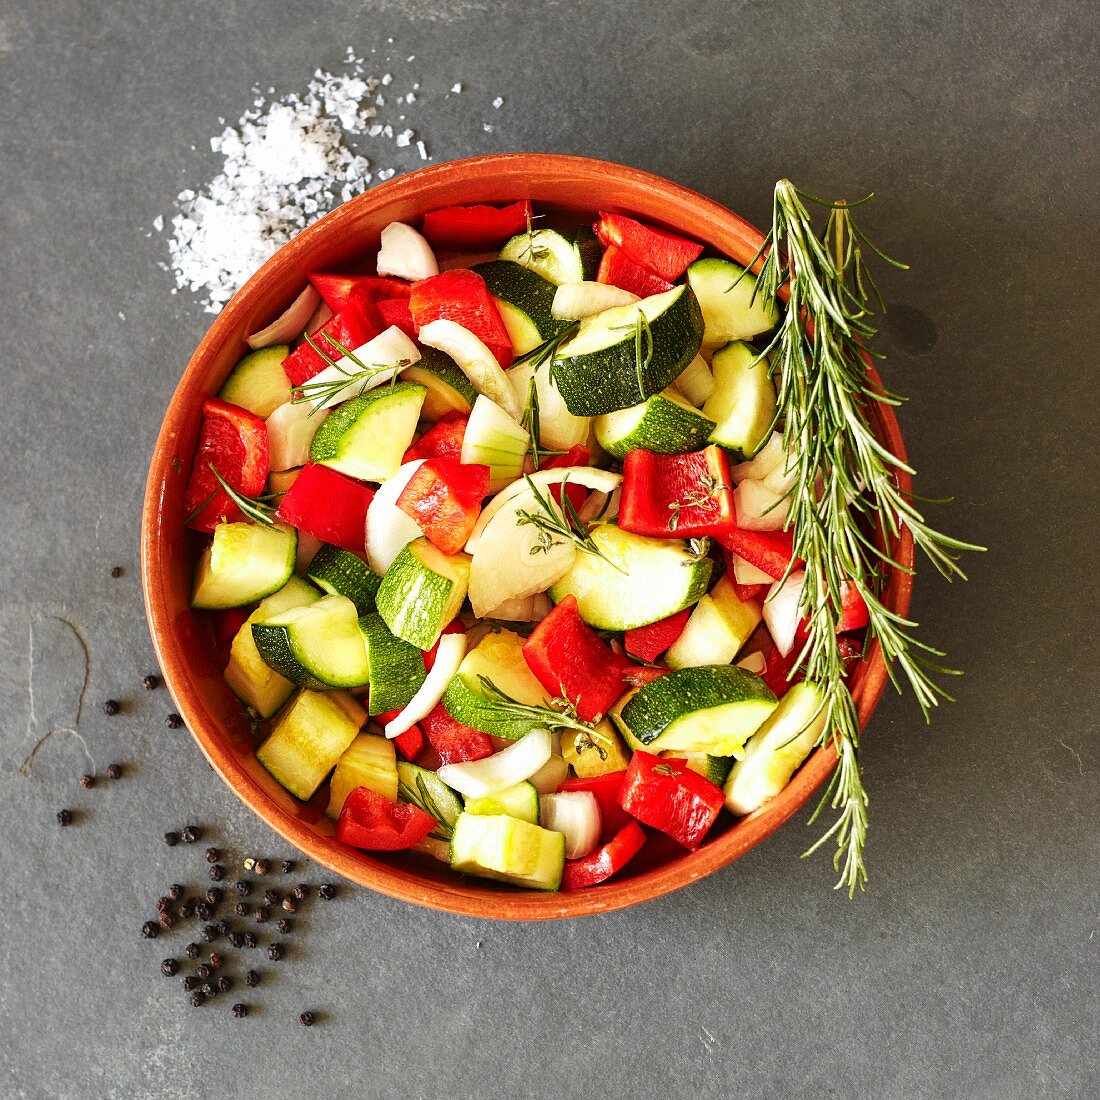 Chopped vegetables with rosemary